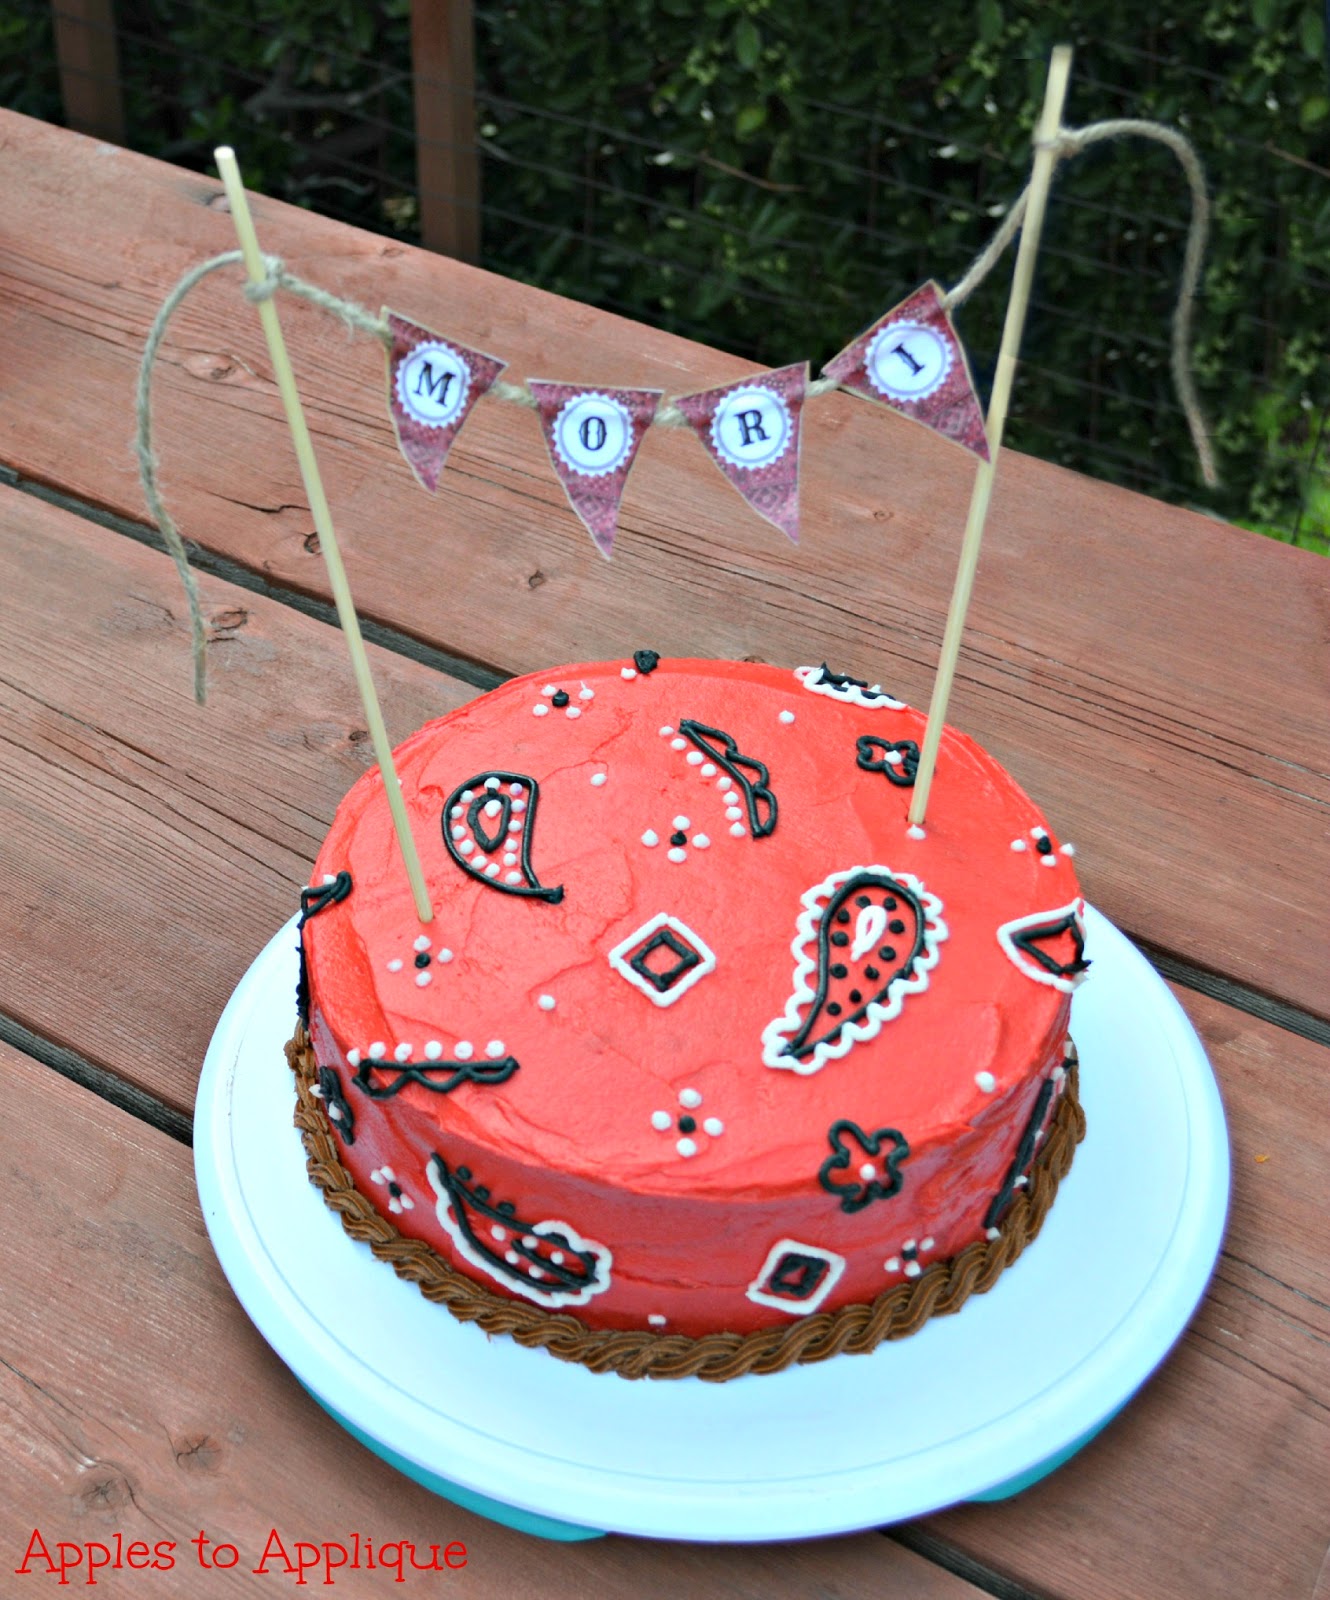 YeeHaw! A DIY Western Birthday Party | Apples to Applique #cowboy #cowgirl #kidsparty